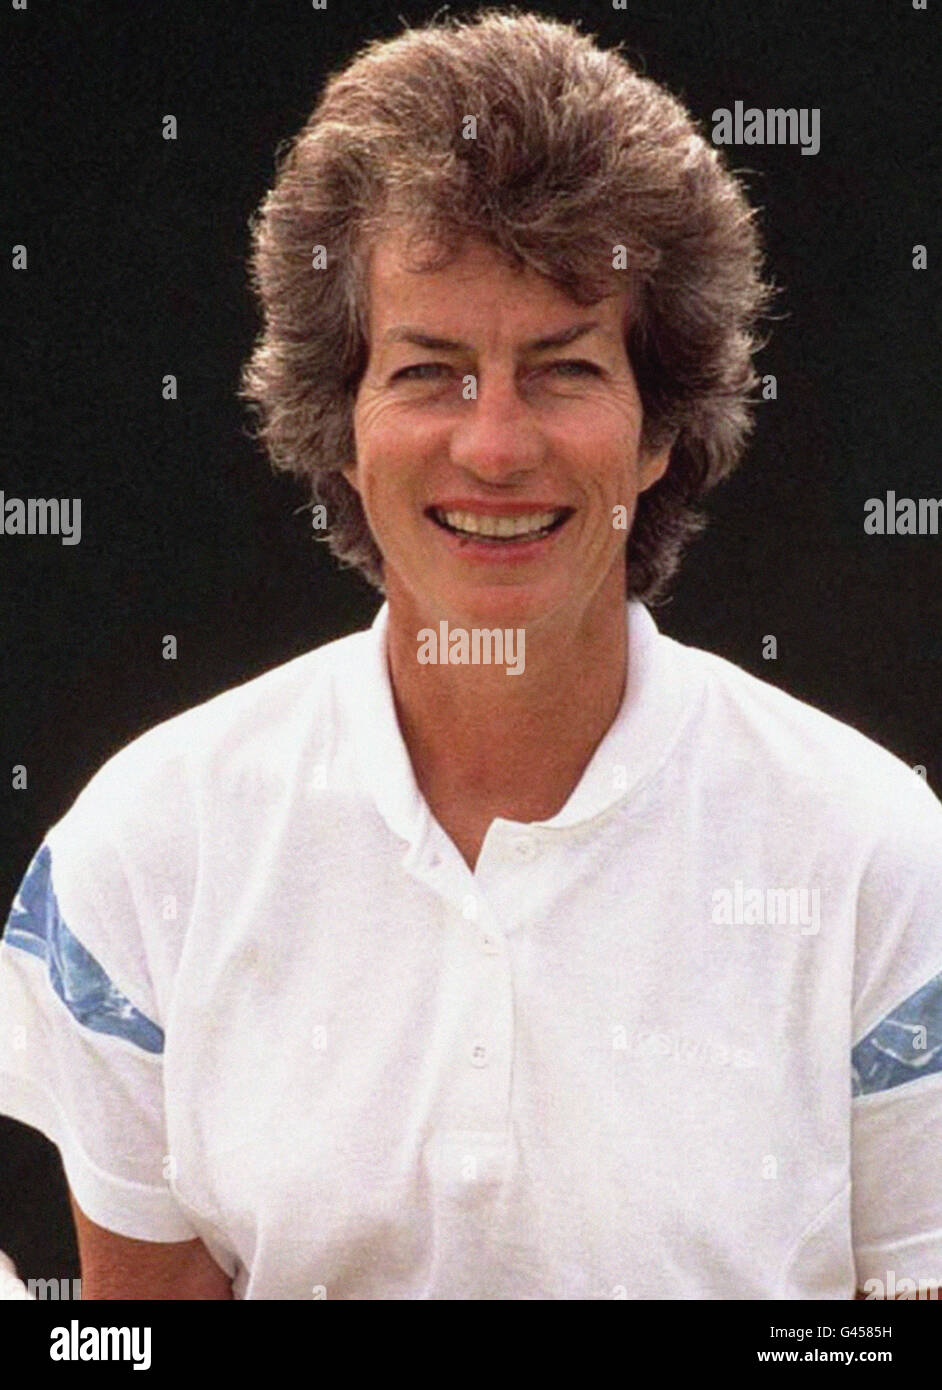 Former Wimbledon champion Virginia Wade, winner of the 1977 women's singles title, at Queen's Club today (Sunday) for the launch of a new initiative for young tennis players. Soap powder manufacturers Persil will be offering all Persil products at 1977 prices for the second week of the Wimbledon Championships and for every coupon redeemed will make a donation to the Lawn Tennis Association to help fund British youth tennis. Stock Photo